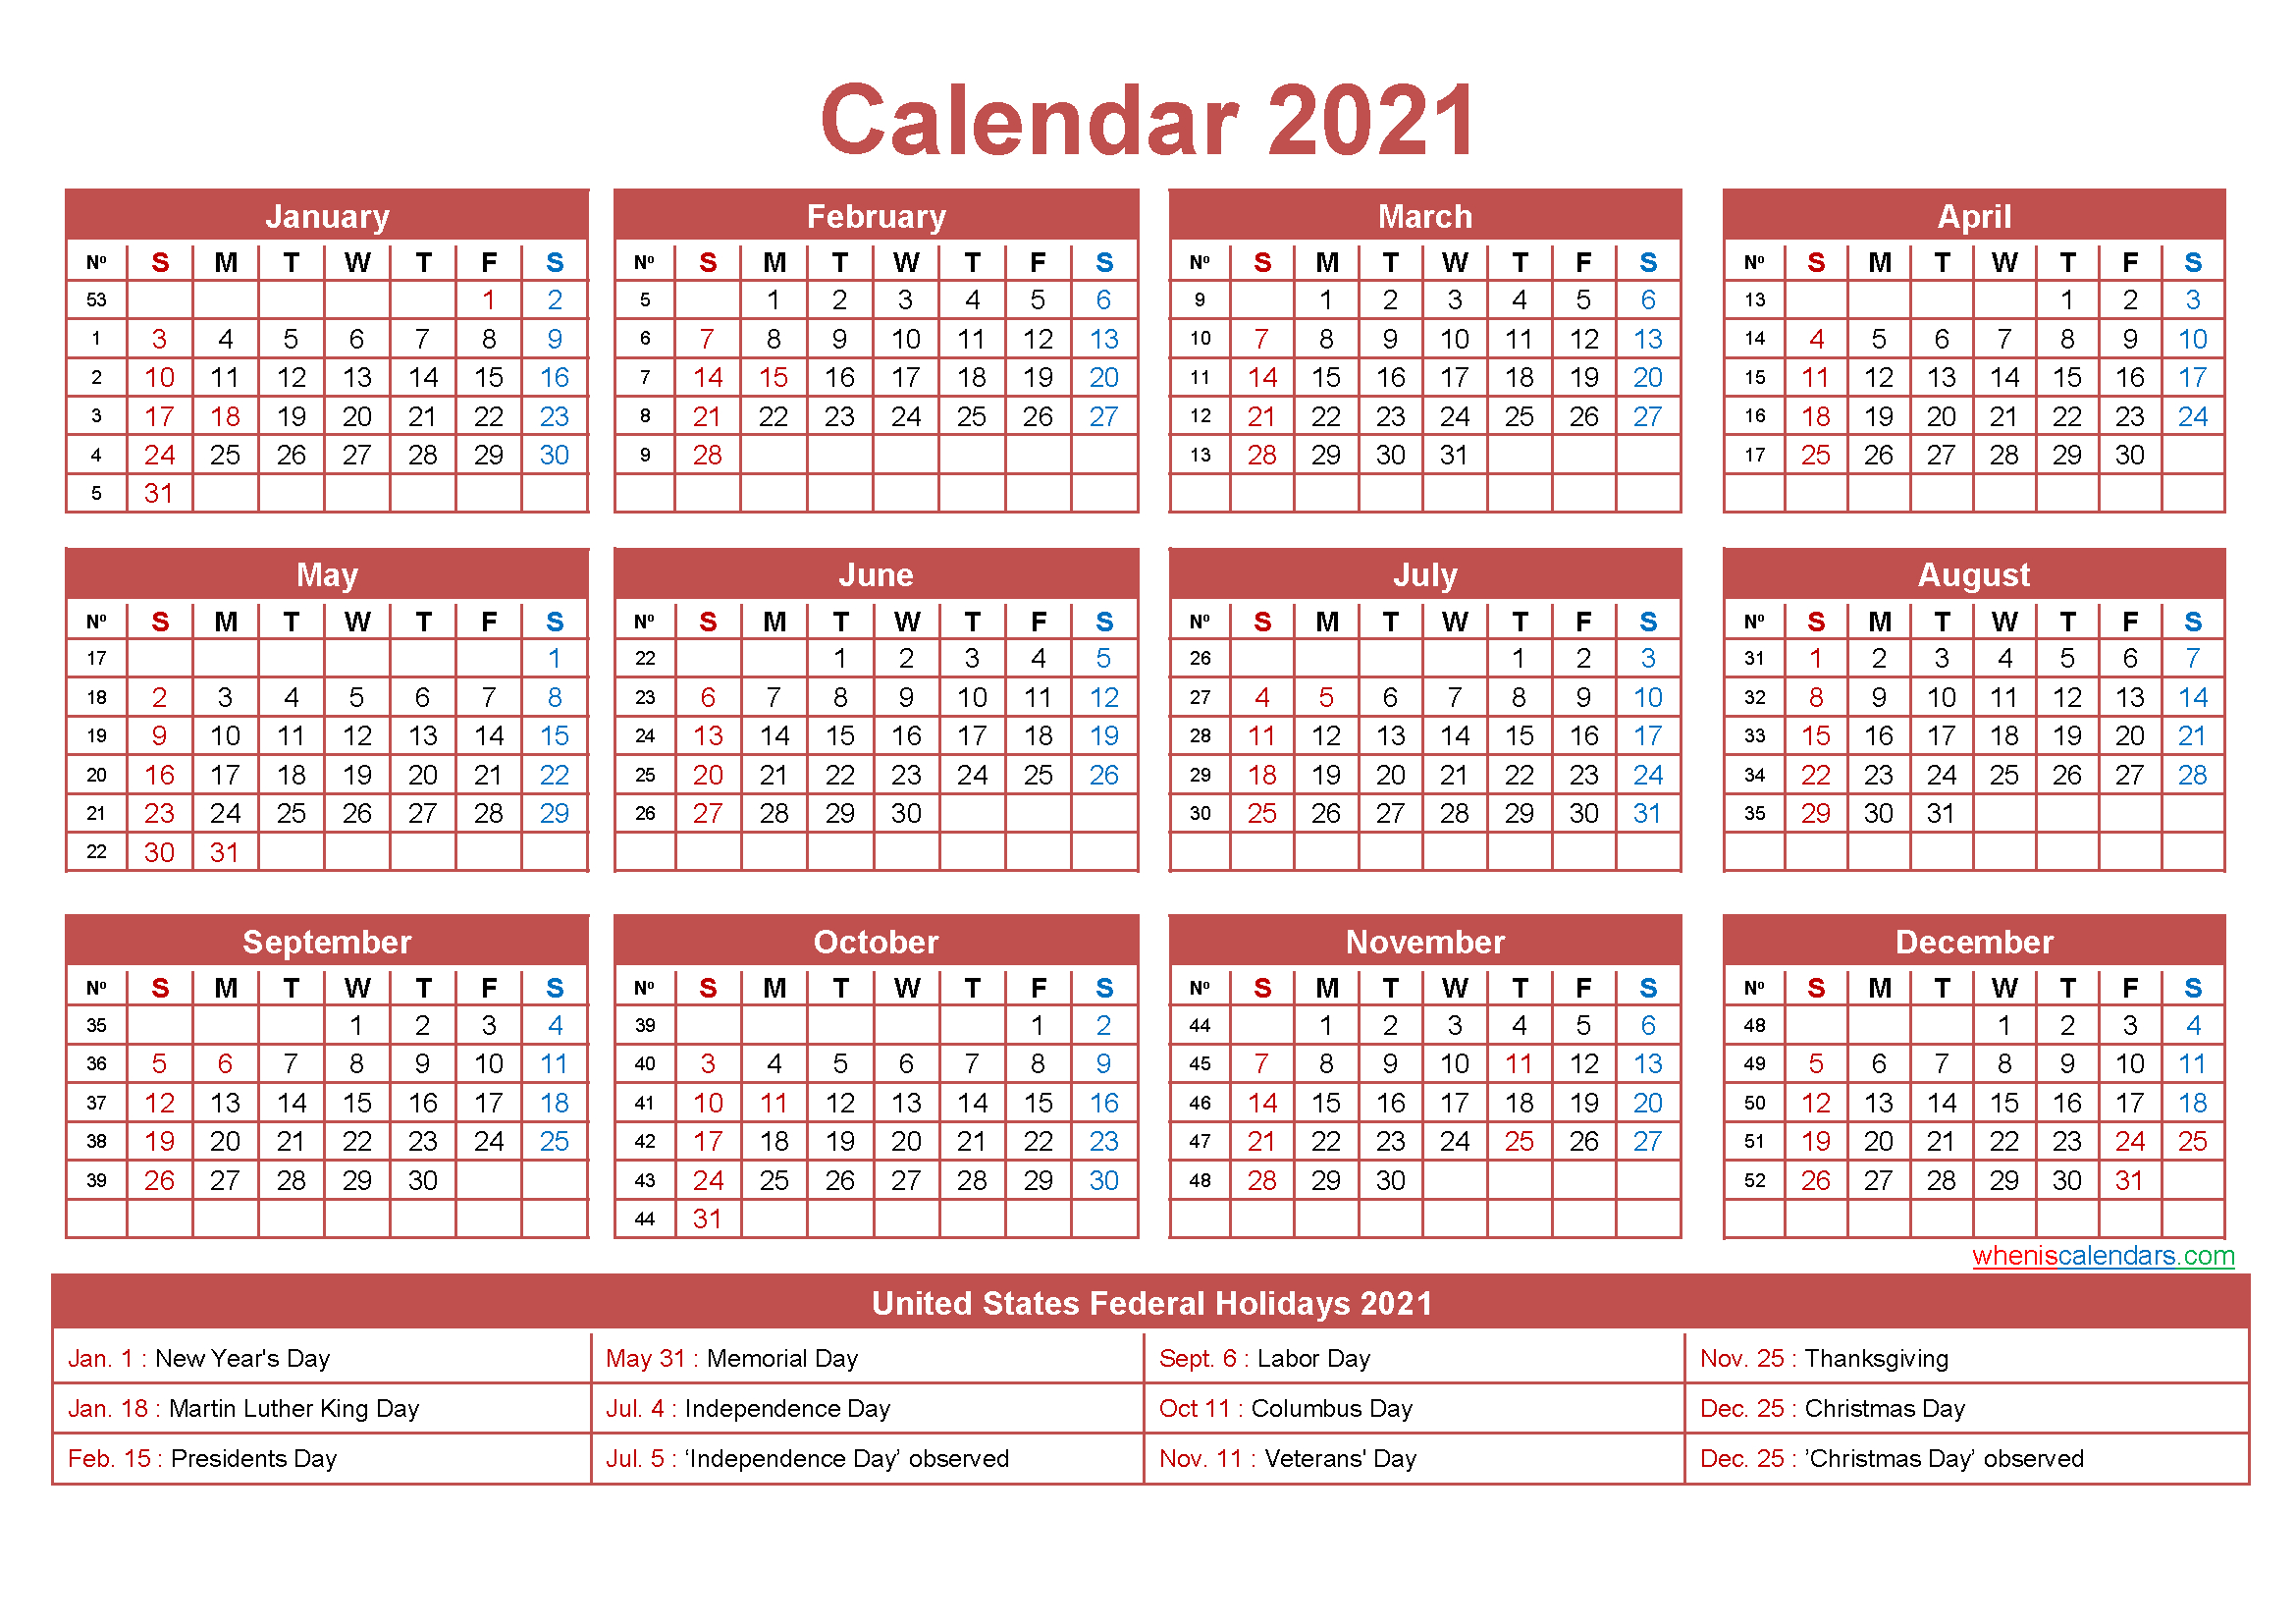 Free Editable 2021 Calendars In Word : January 2021 Calendar Templates : Choose The Month That-2021 Calendar Template Word